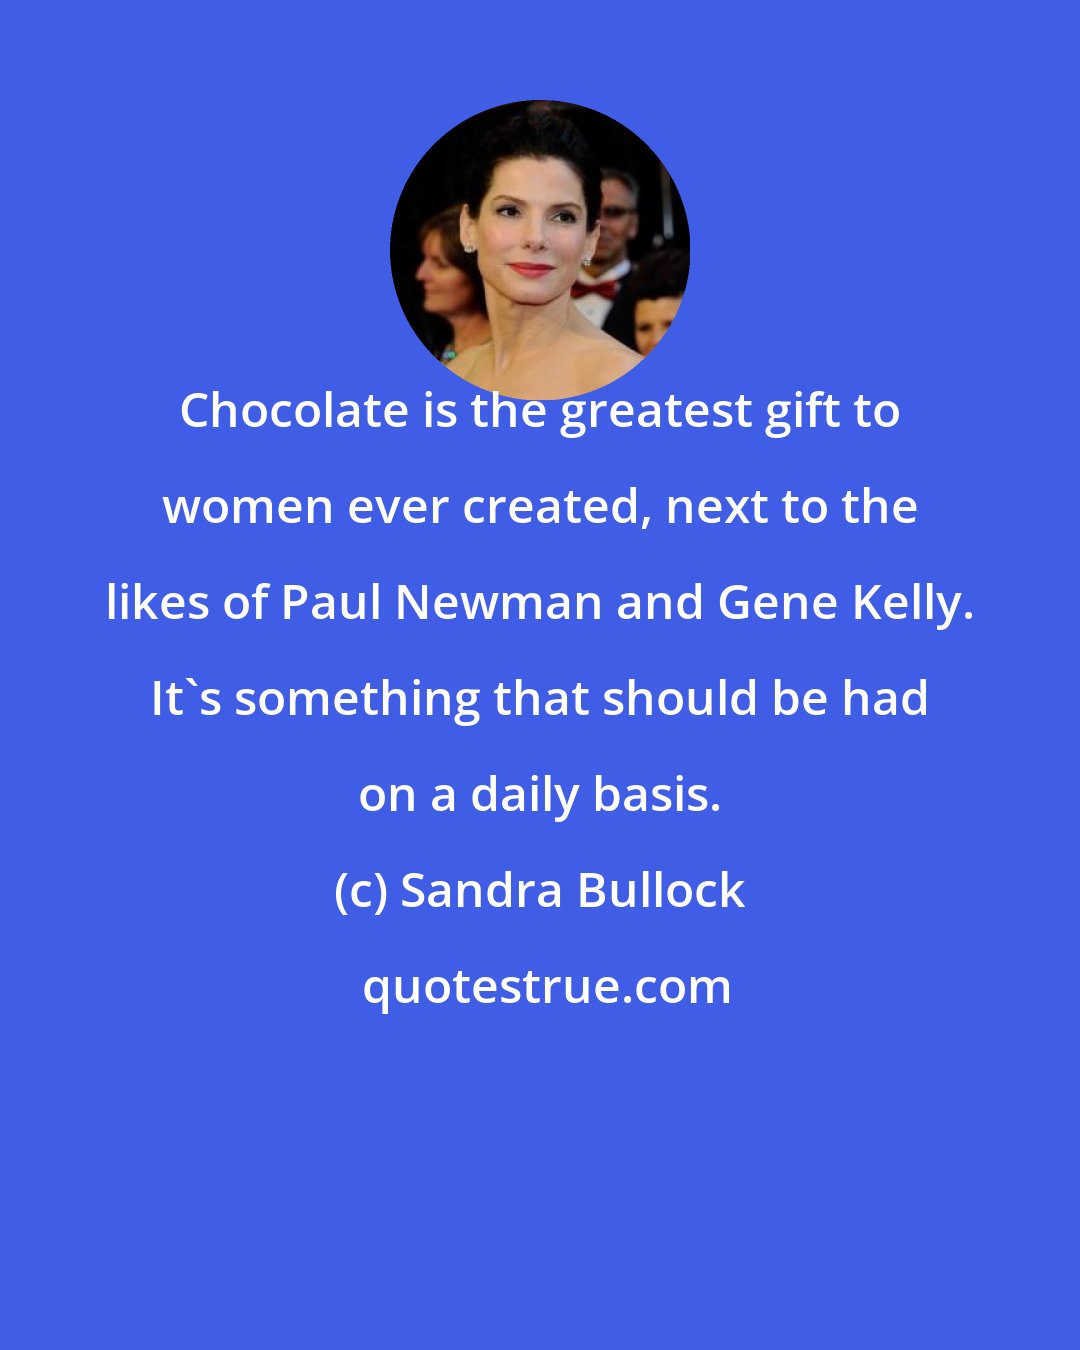 Sandra Bullock: Chocolate is the greatest gift to women ever created, next to the likes of Paul Newman and Gene Kelly. It's something that should be had on a daily basis.